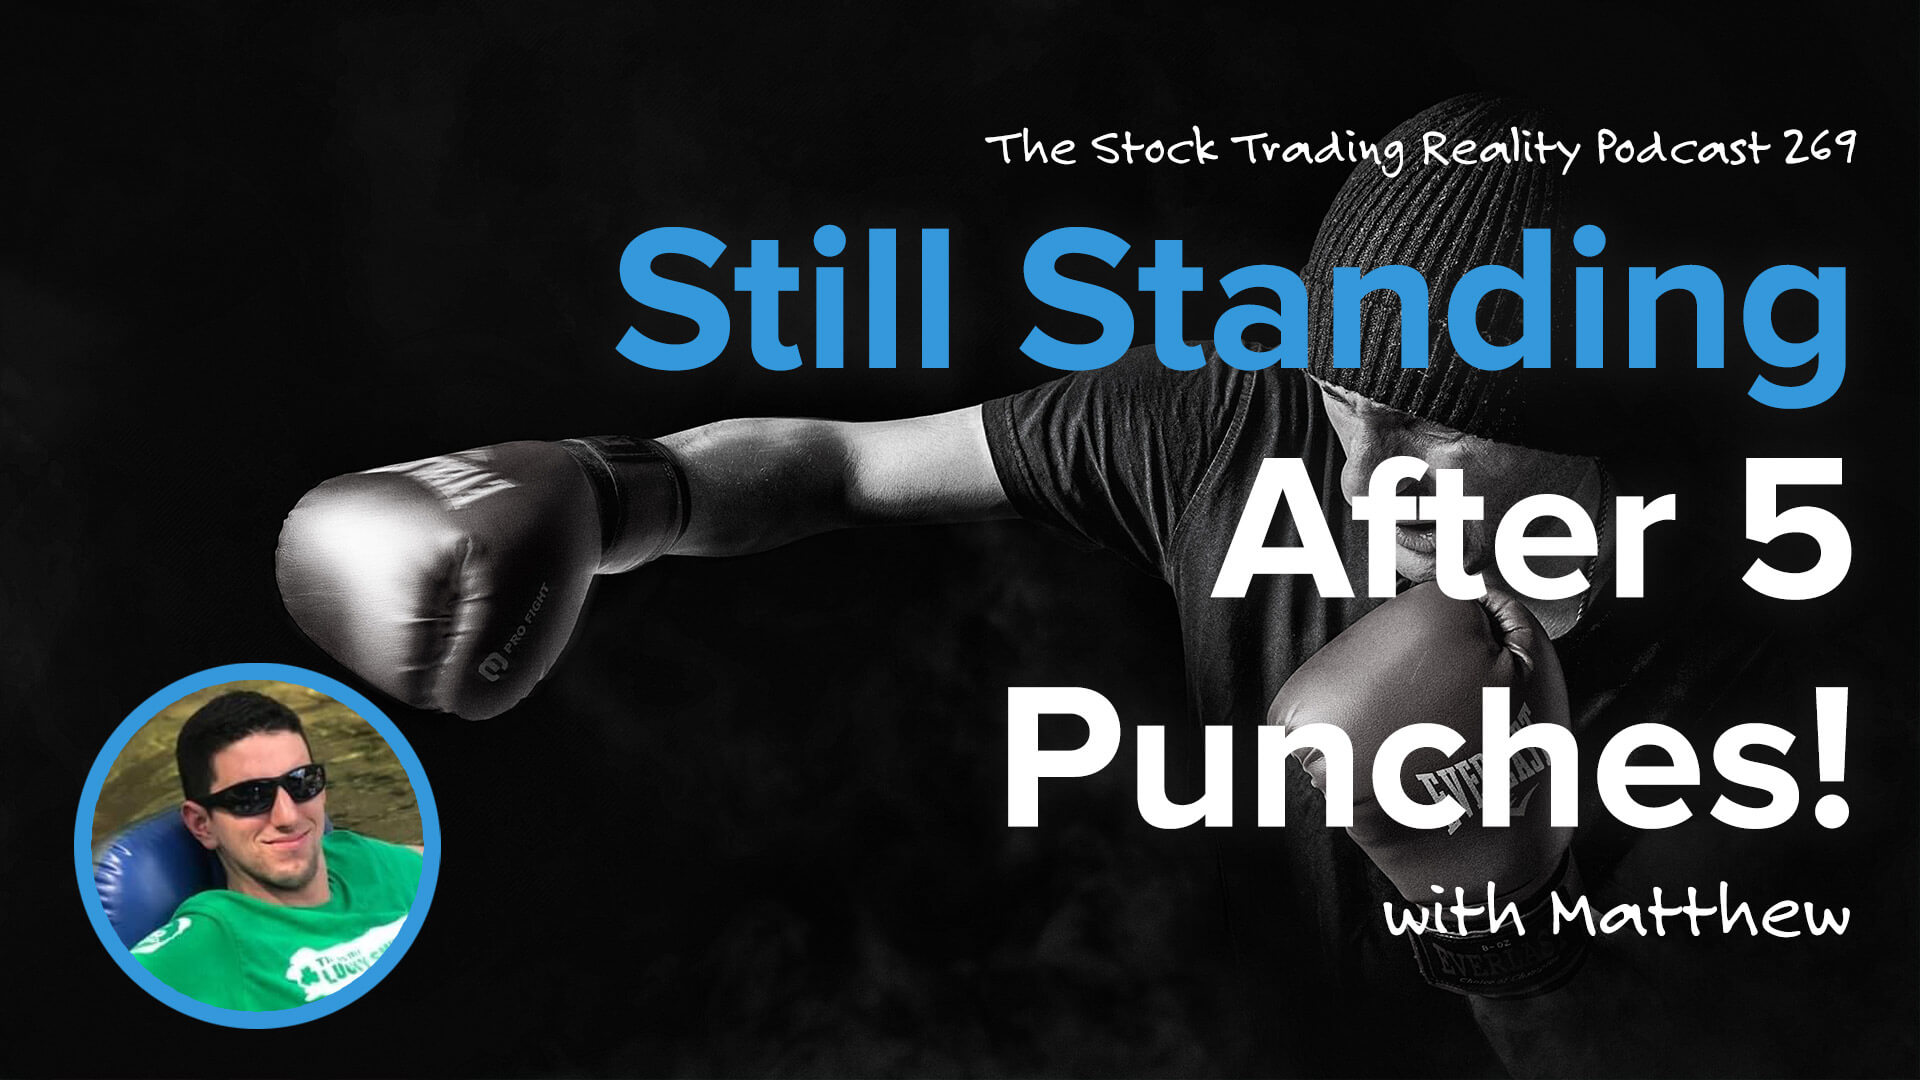 Still Standing After 5 Punches! | STR 269